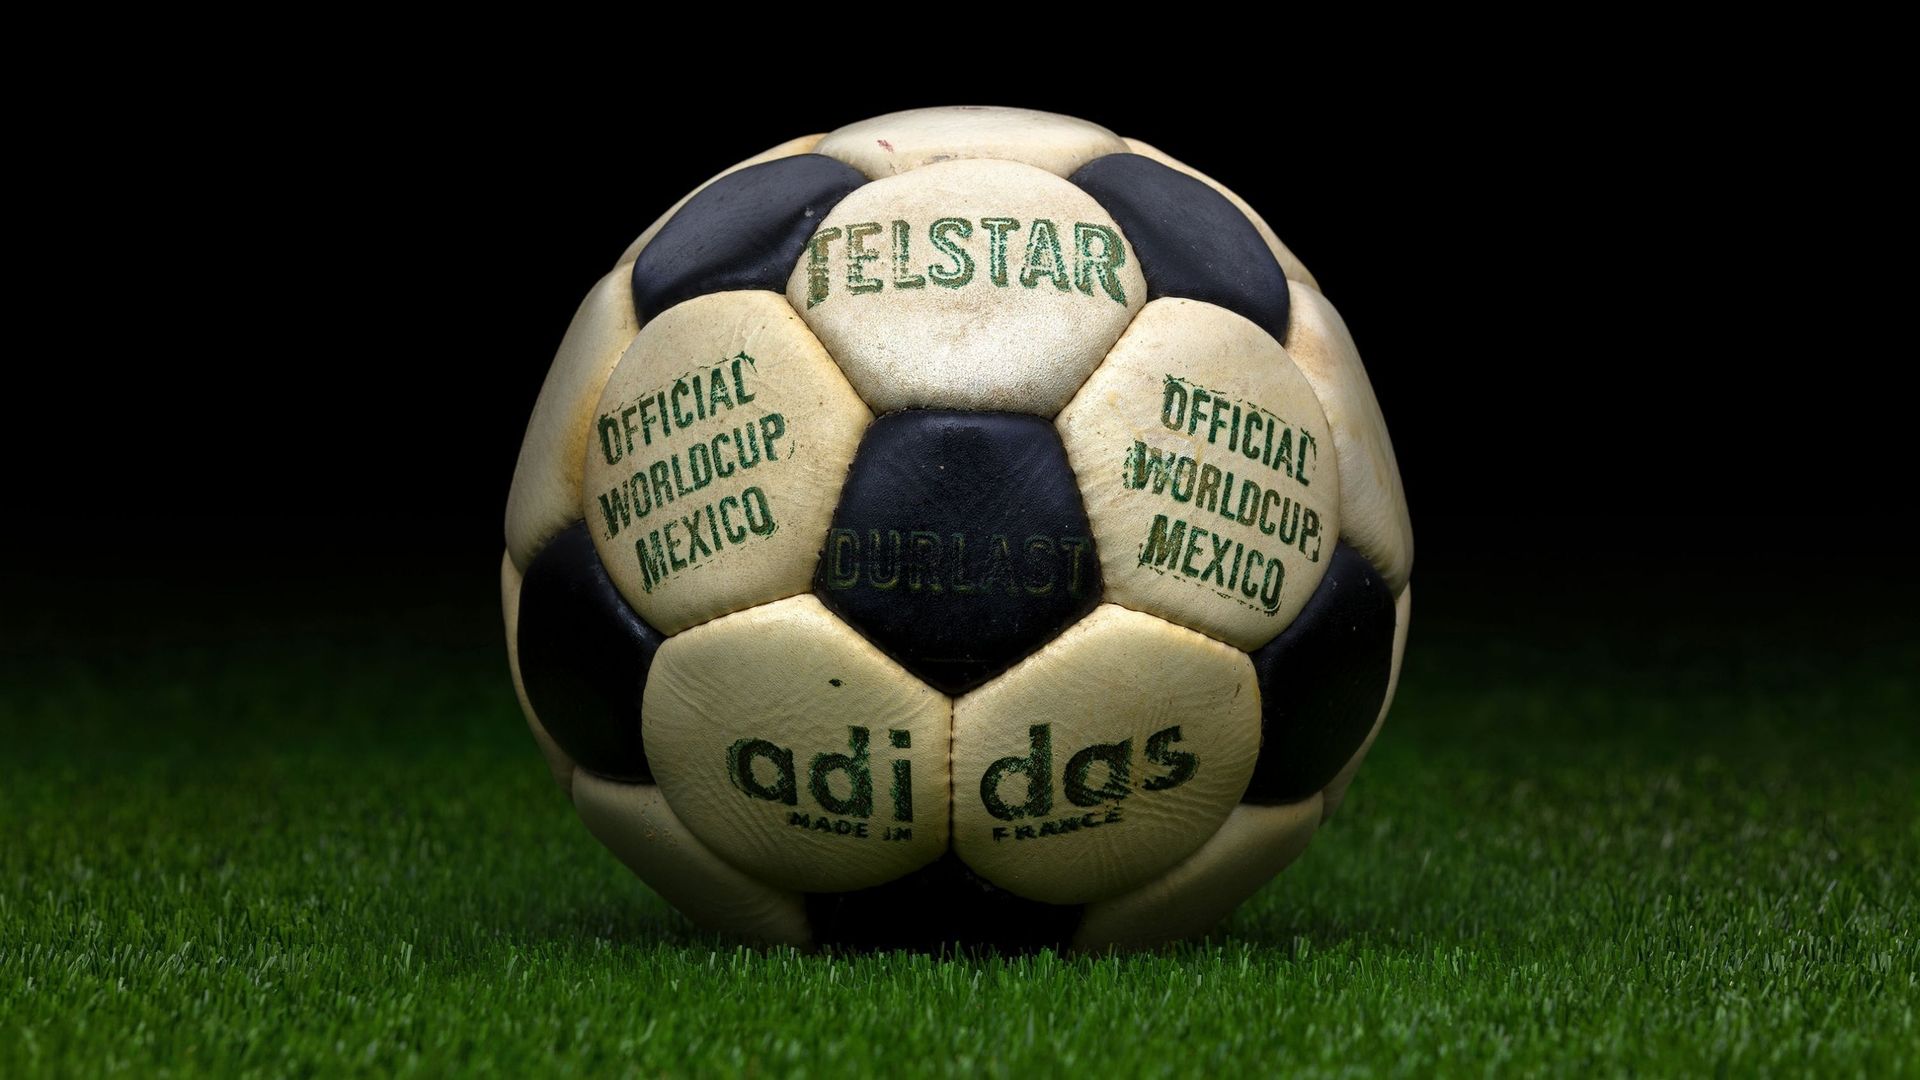 The adidas Telstar Durlast, the official match ball of the 1970 FIFA World Cup in Mexico. The official match ball had 32 black and white panels with Durlast waterproof coating and was the first adidas World Cup ball.